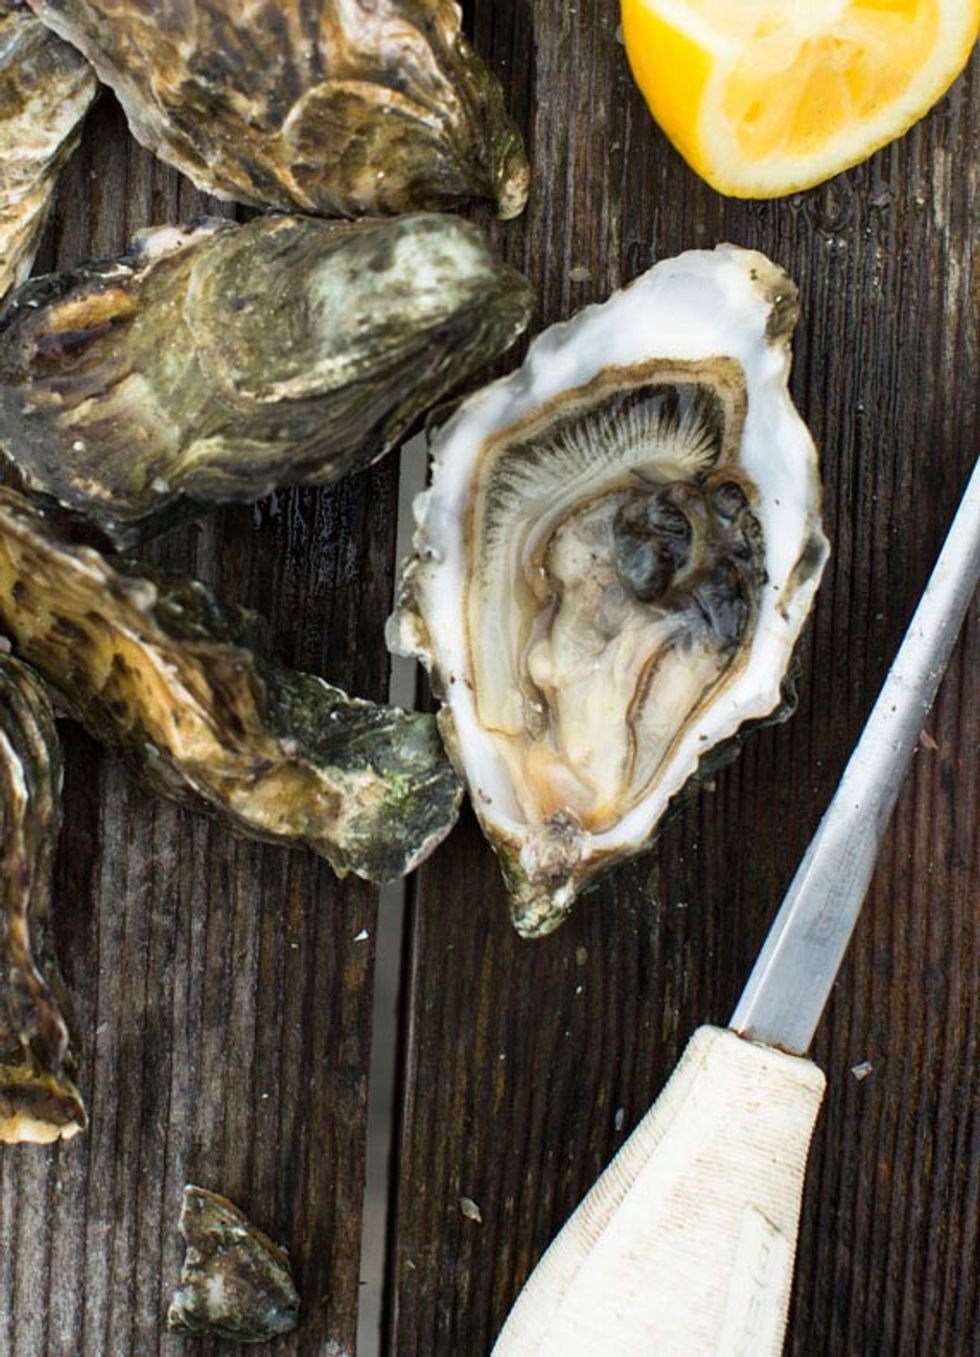 From Scratch: Drakes Bay Oyster Company